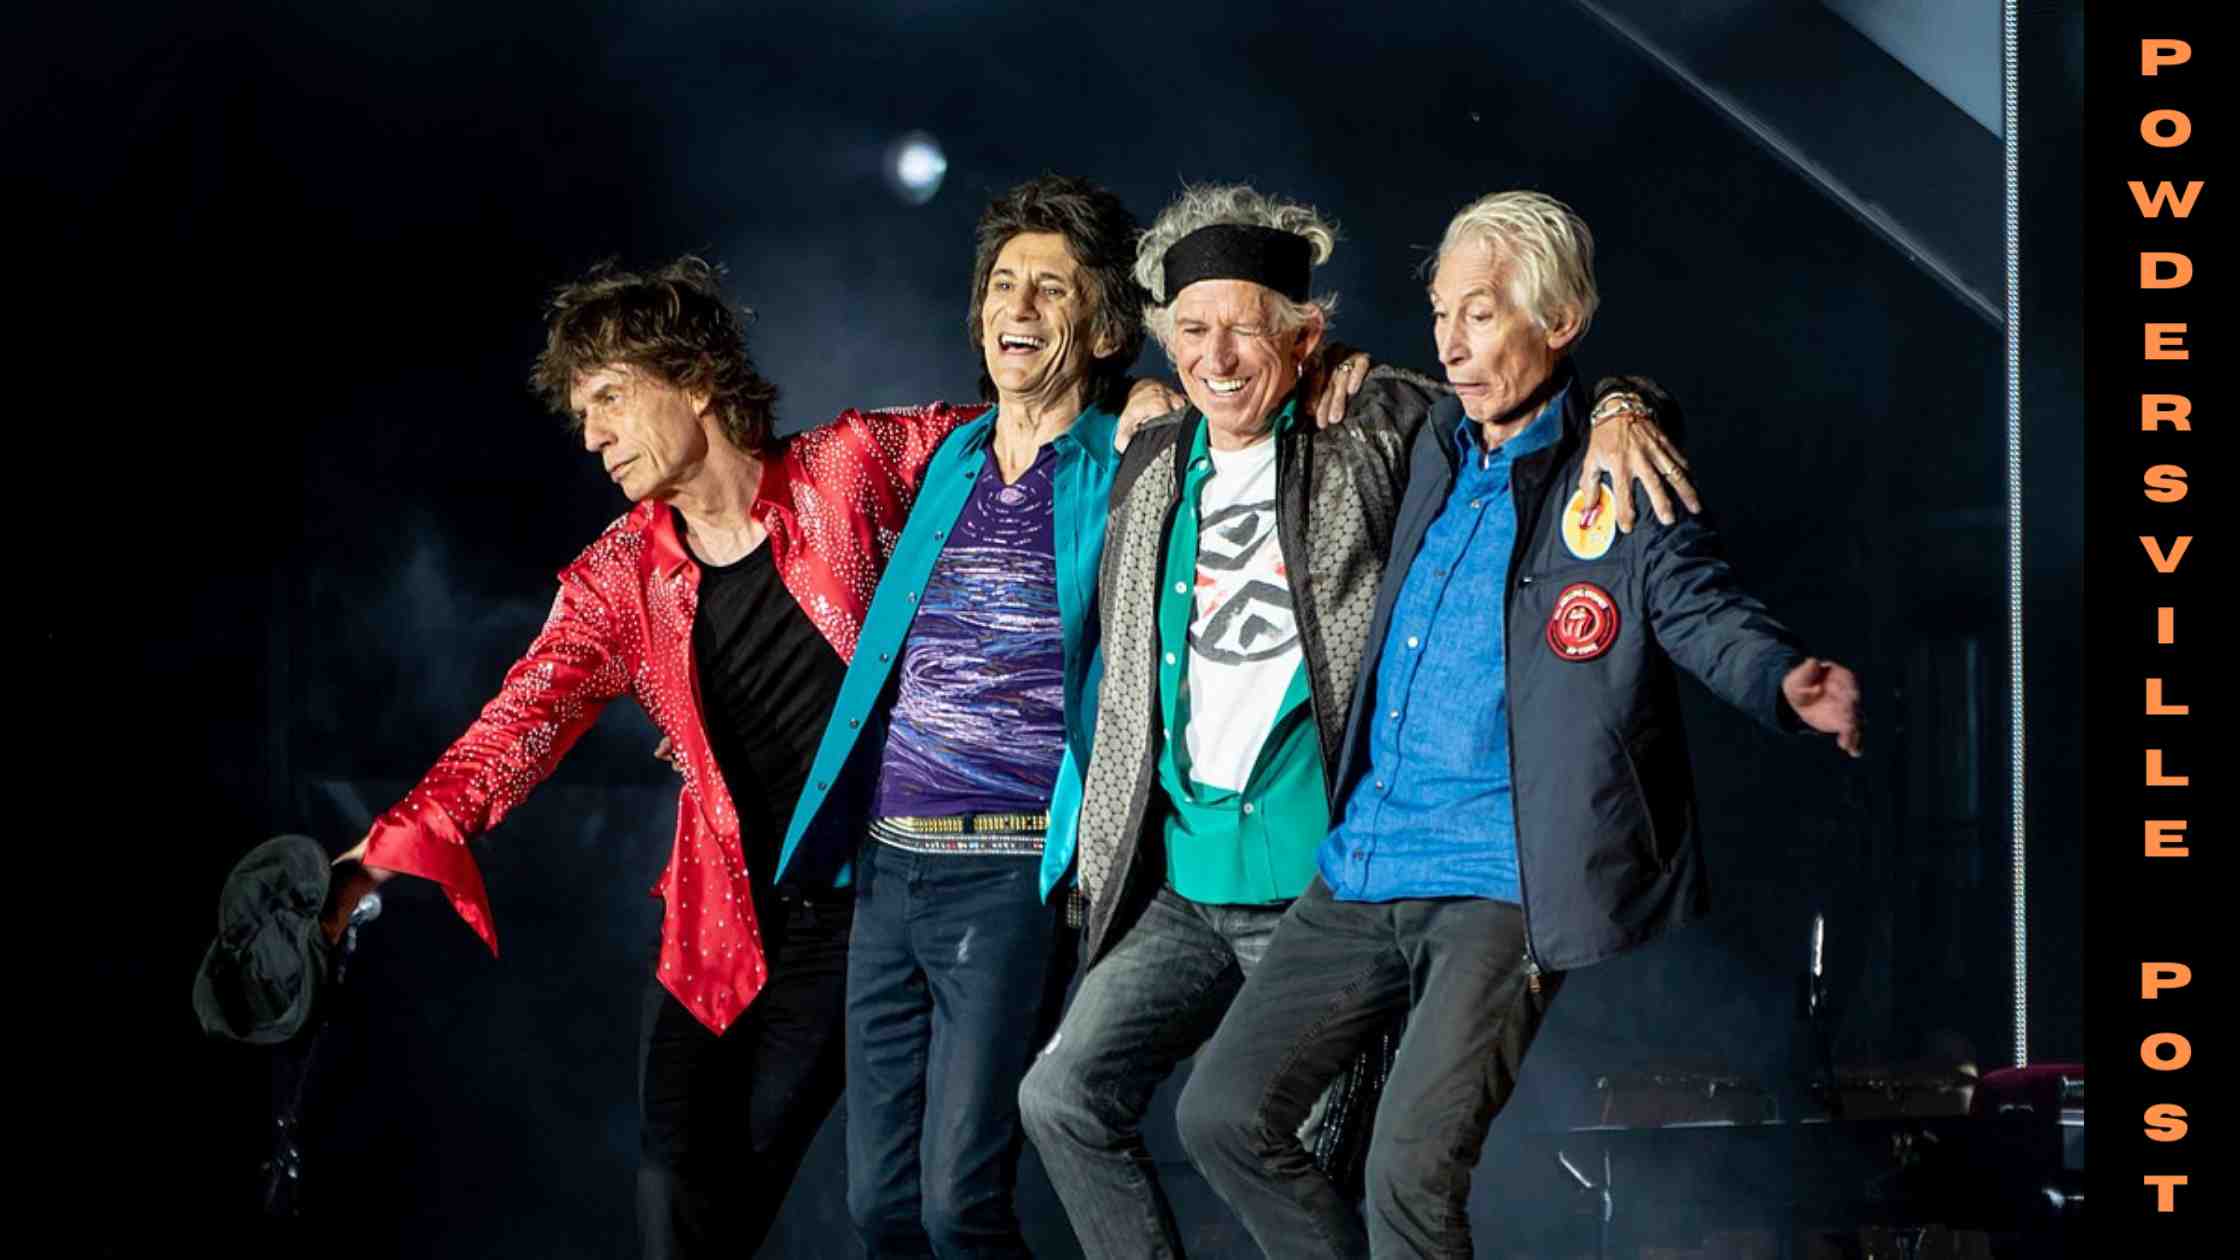 In Honor Of The 60th Anniversary, Legendary Band Rolling Stone Is Coming With A European Tour Called Sixty